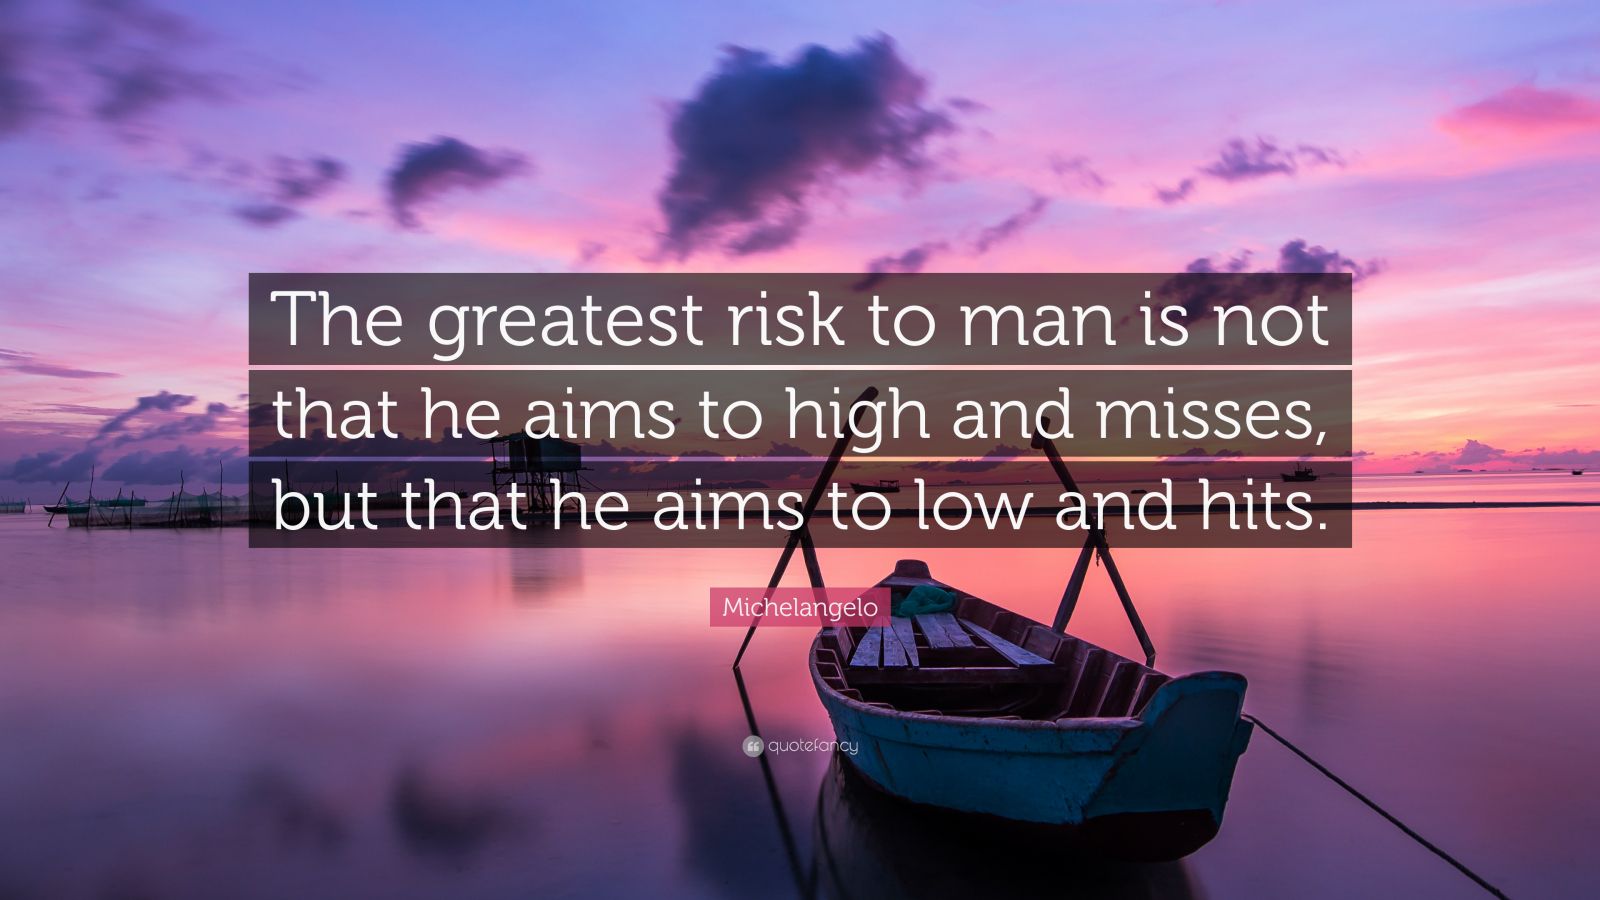 Michelangelo Quote: “The greatest risk to man is not that he aims to